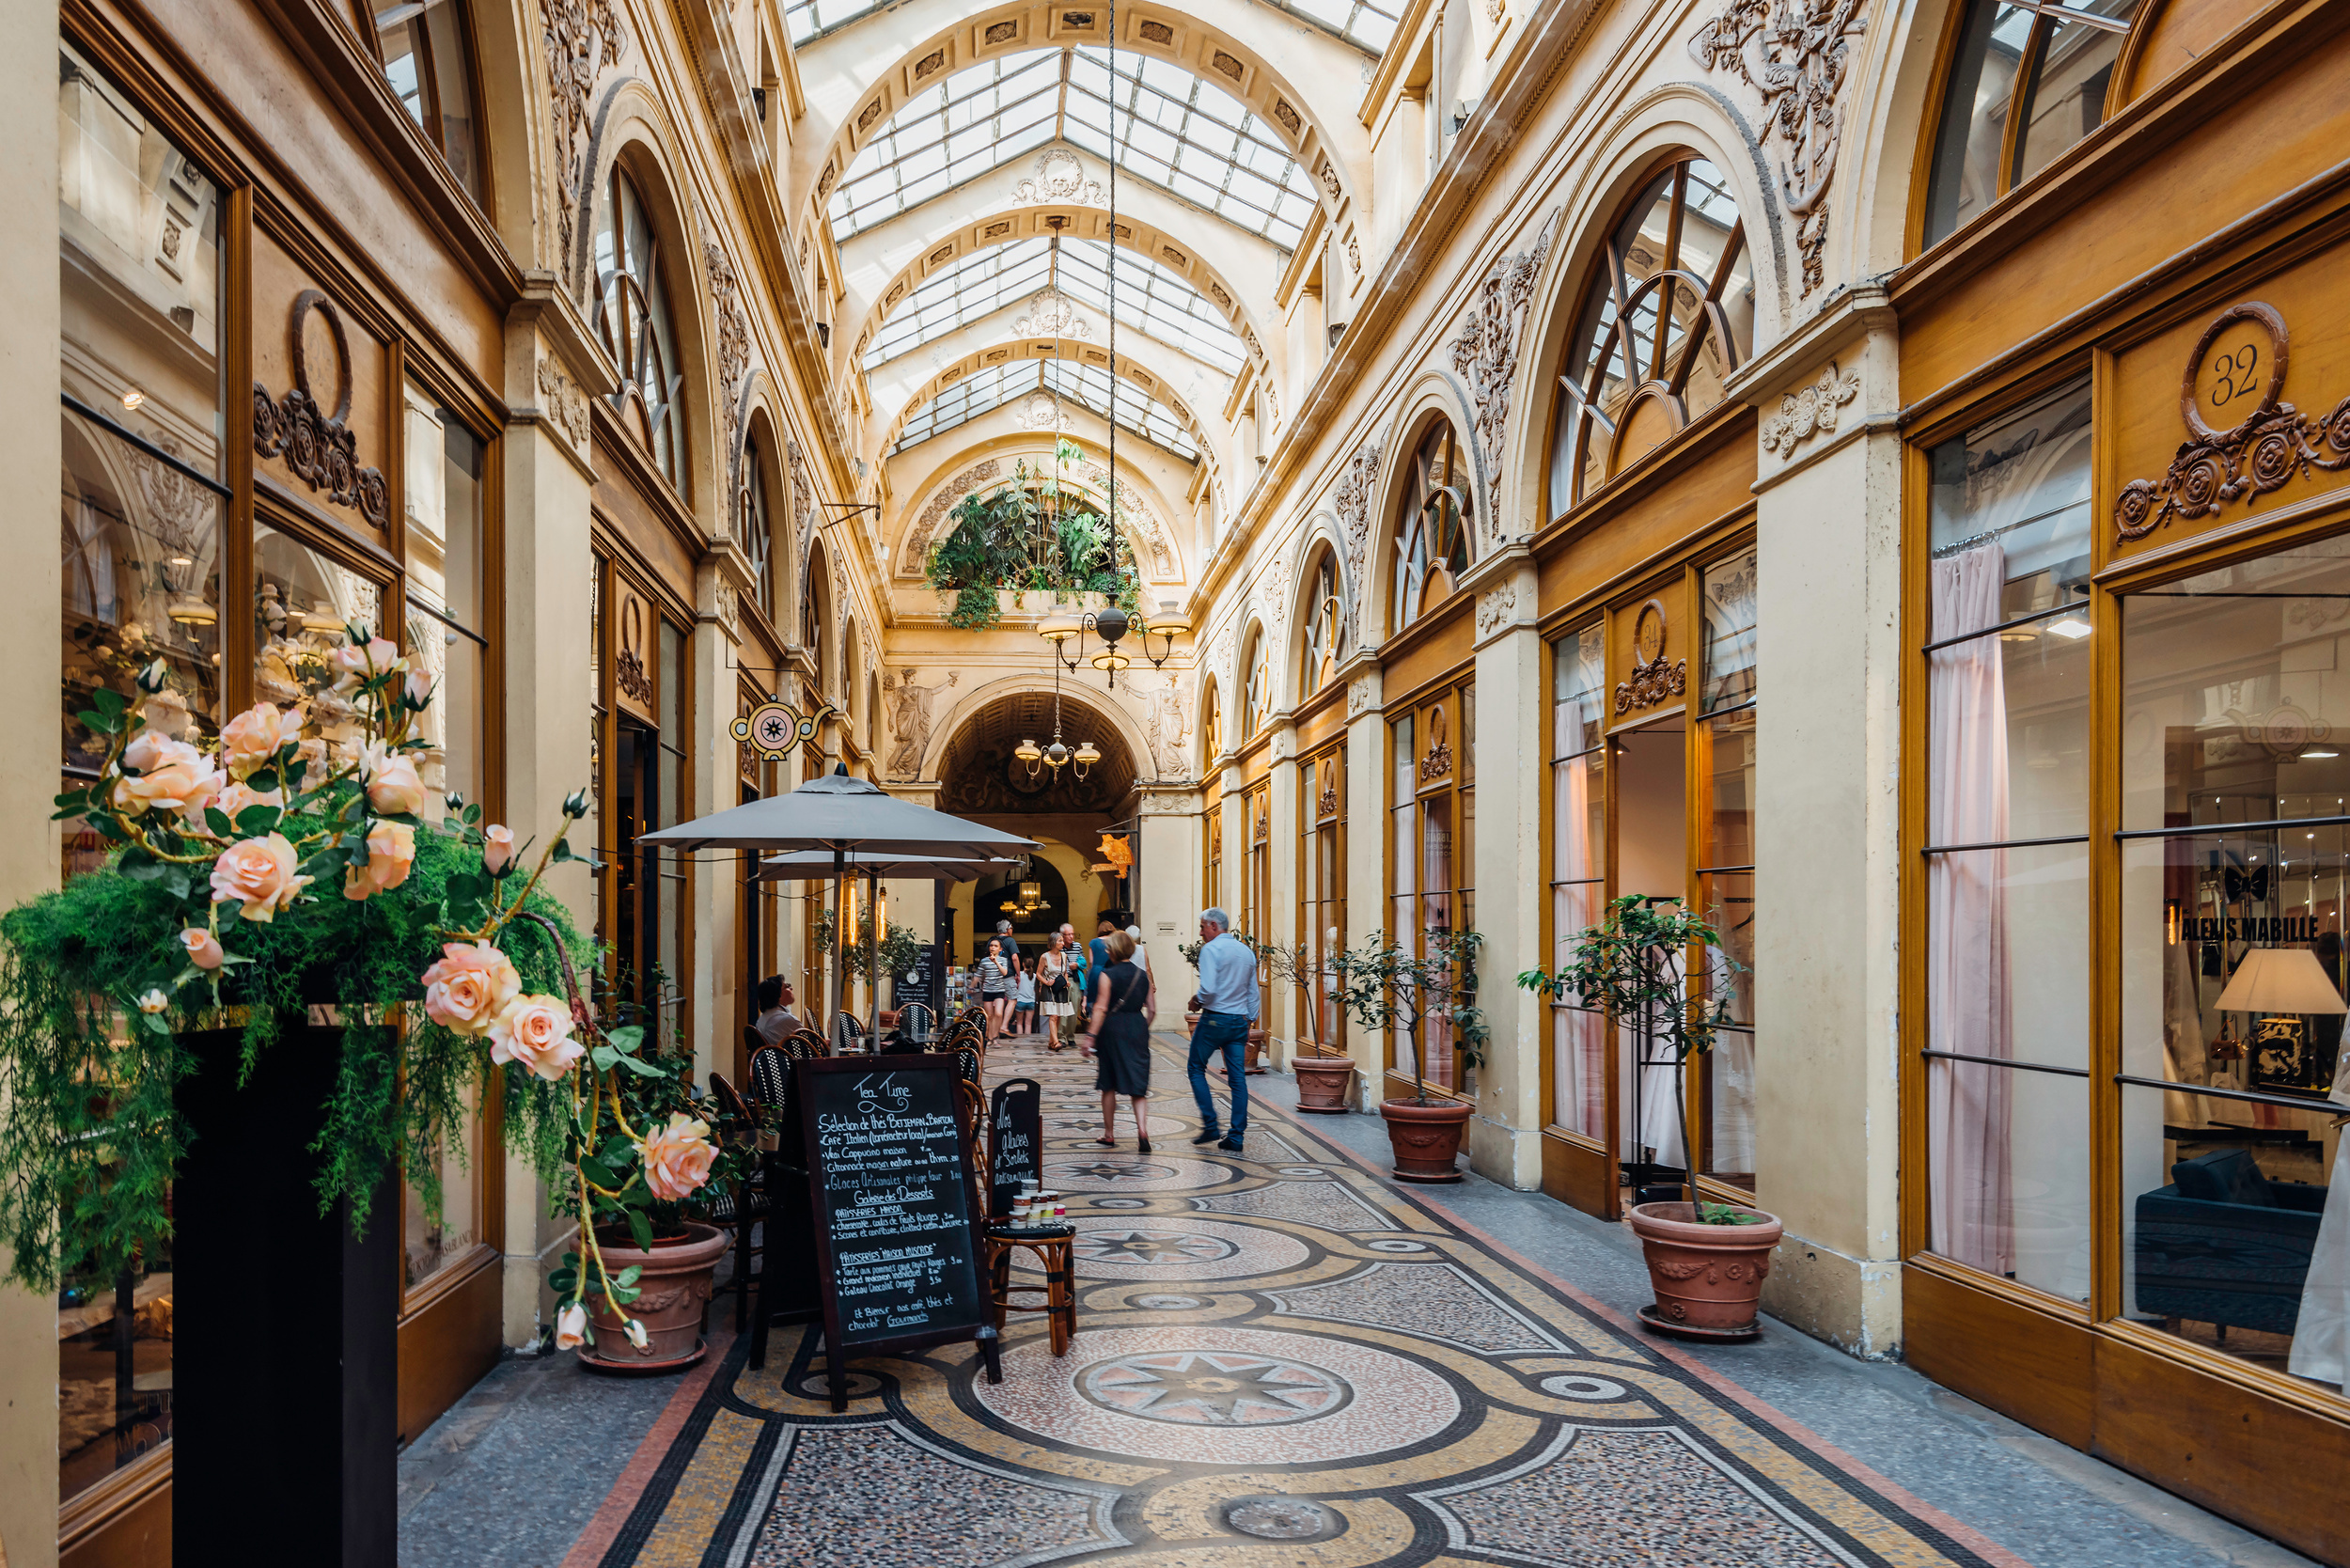 <p>The well-adorned passageways and covered shopping centers are some of the best places to wander in Paris. Referred to as “galeries” in French, the Galerie Vivienne is one of the most beautiful in the city.</p><p>You may also like: <a href='https://www.yardbarker.com/lifestyle/articles/everyone_should_bookmark_these_super_useful_websites/s1__39903285'>Everyone should bookmark these super useful websites</a></p>